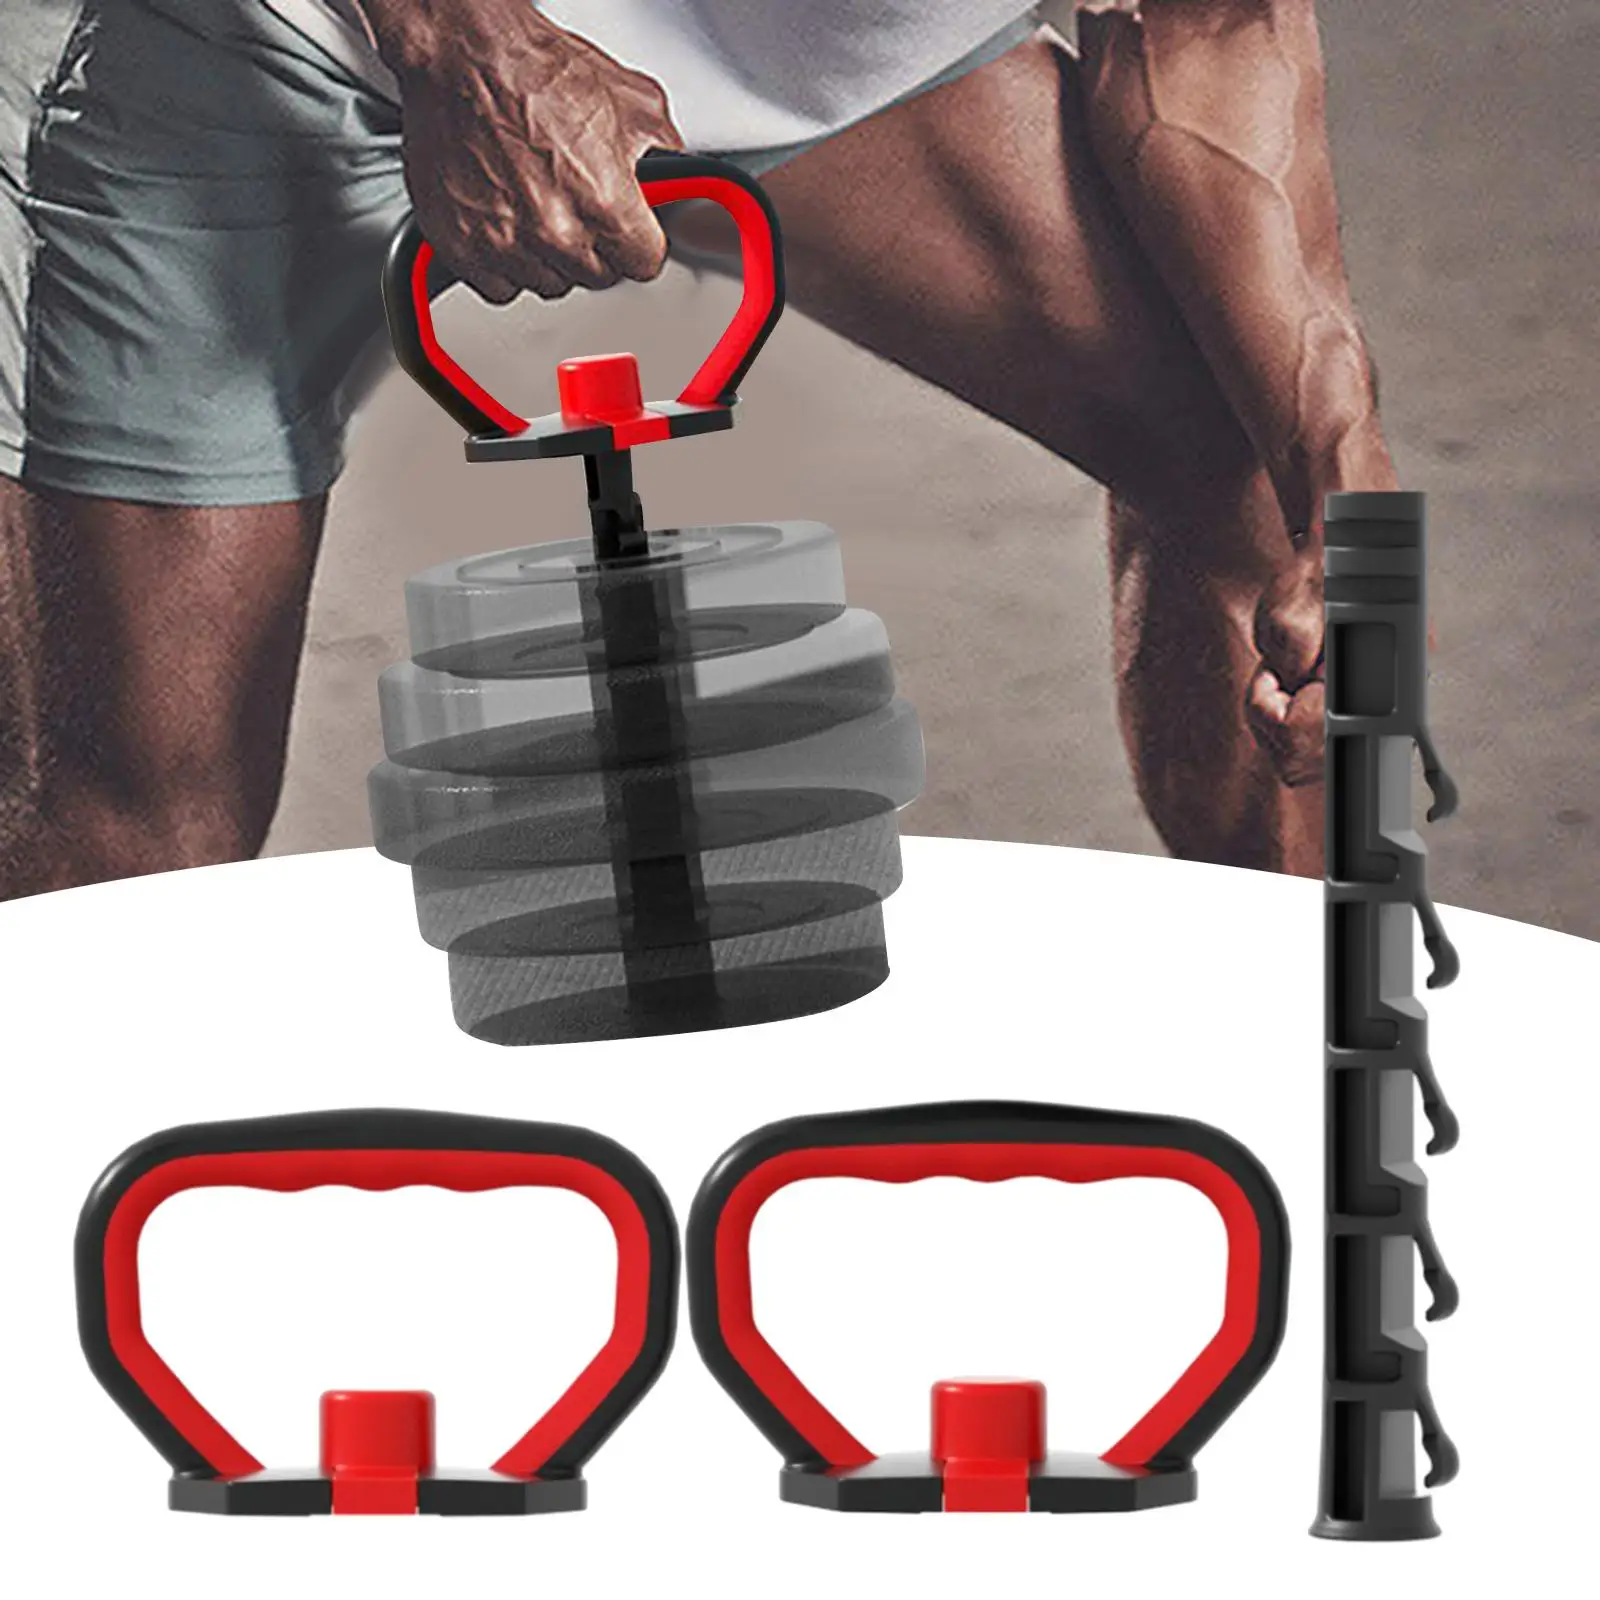 Kettle Bell Grip Handle Adjustable with Base Dumbbell Grip Weights Exercise Full Body Workout Workout Equipment Grip Handle